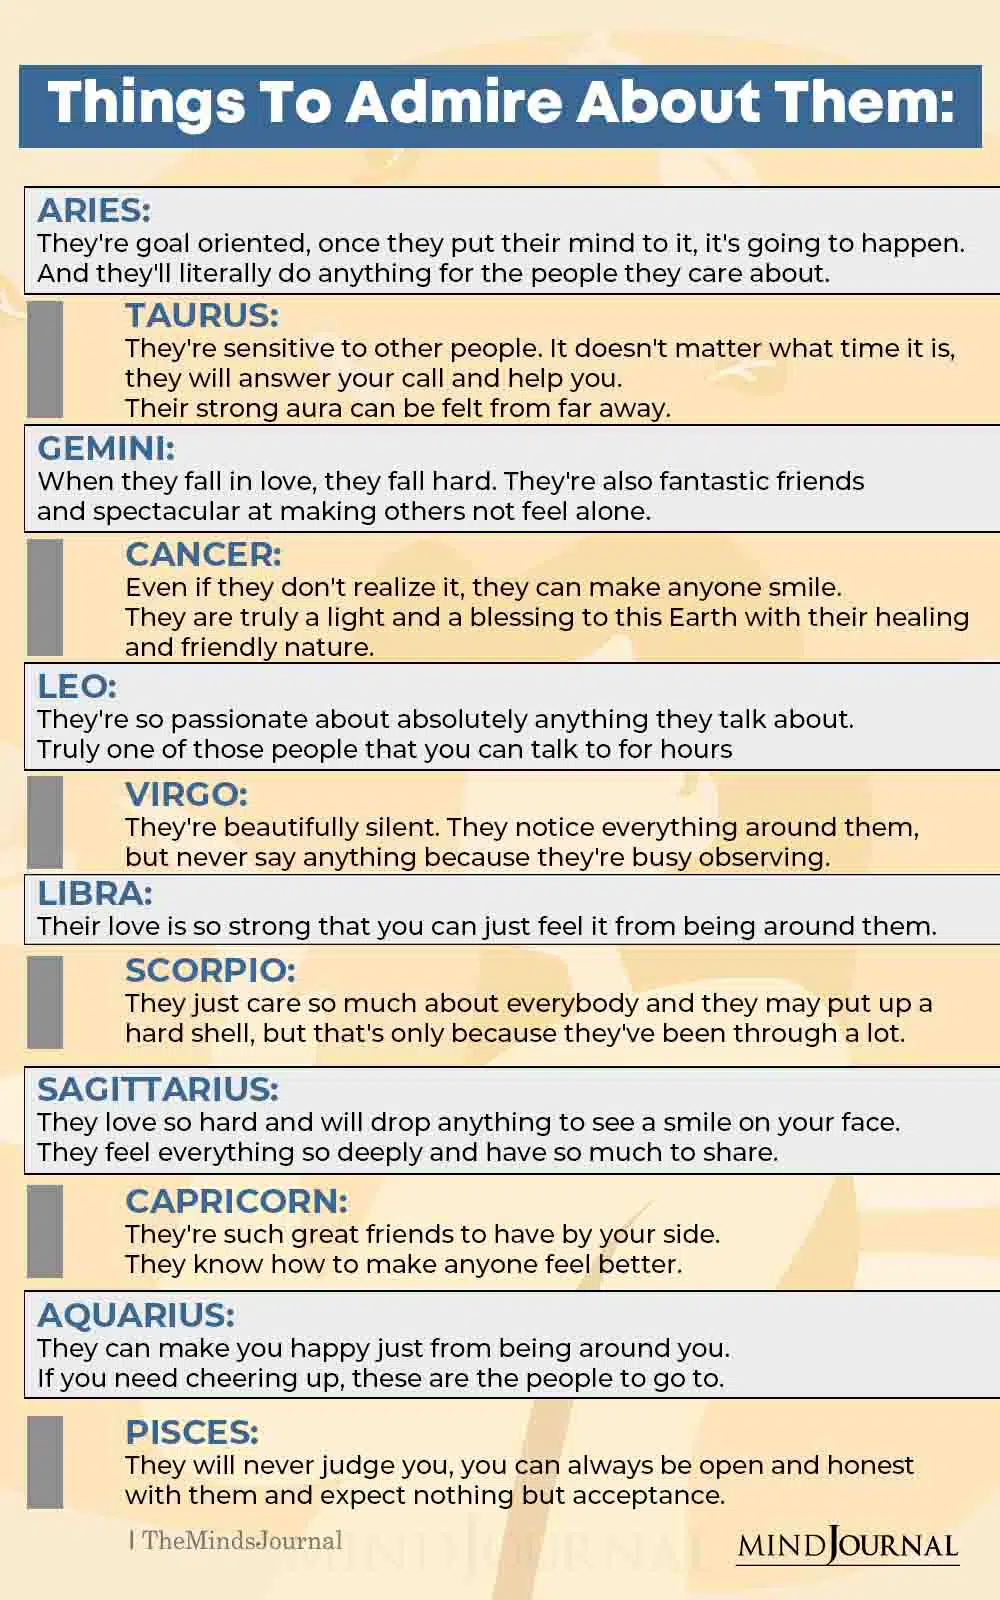 Things To Admire About The Zodiac Signs